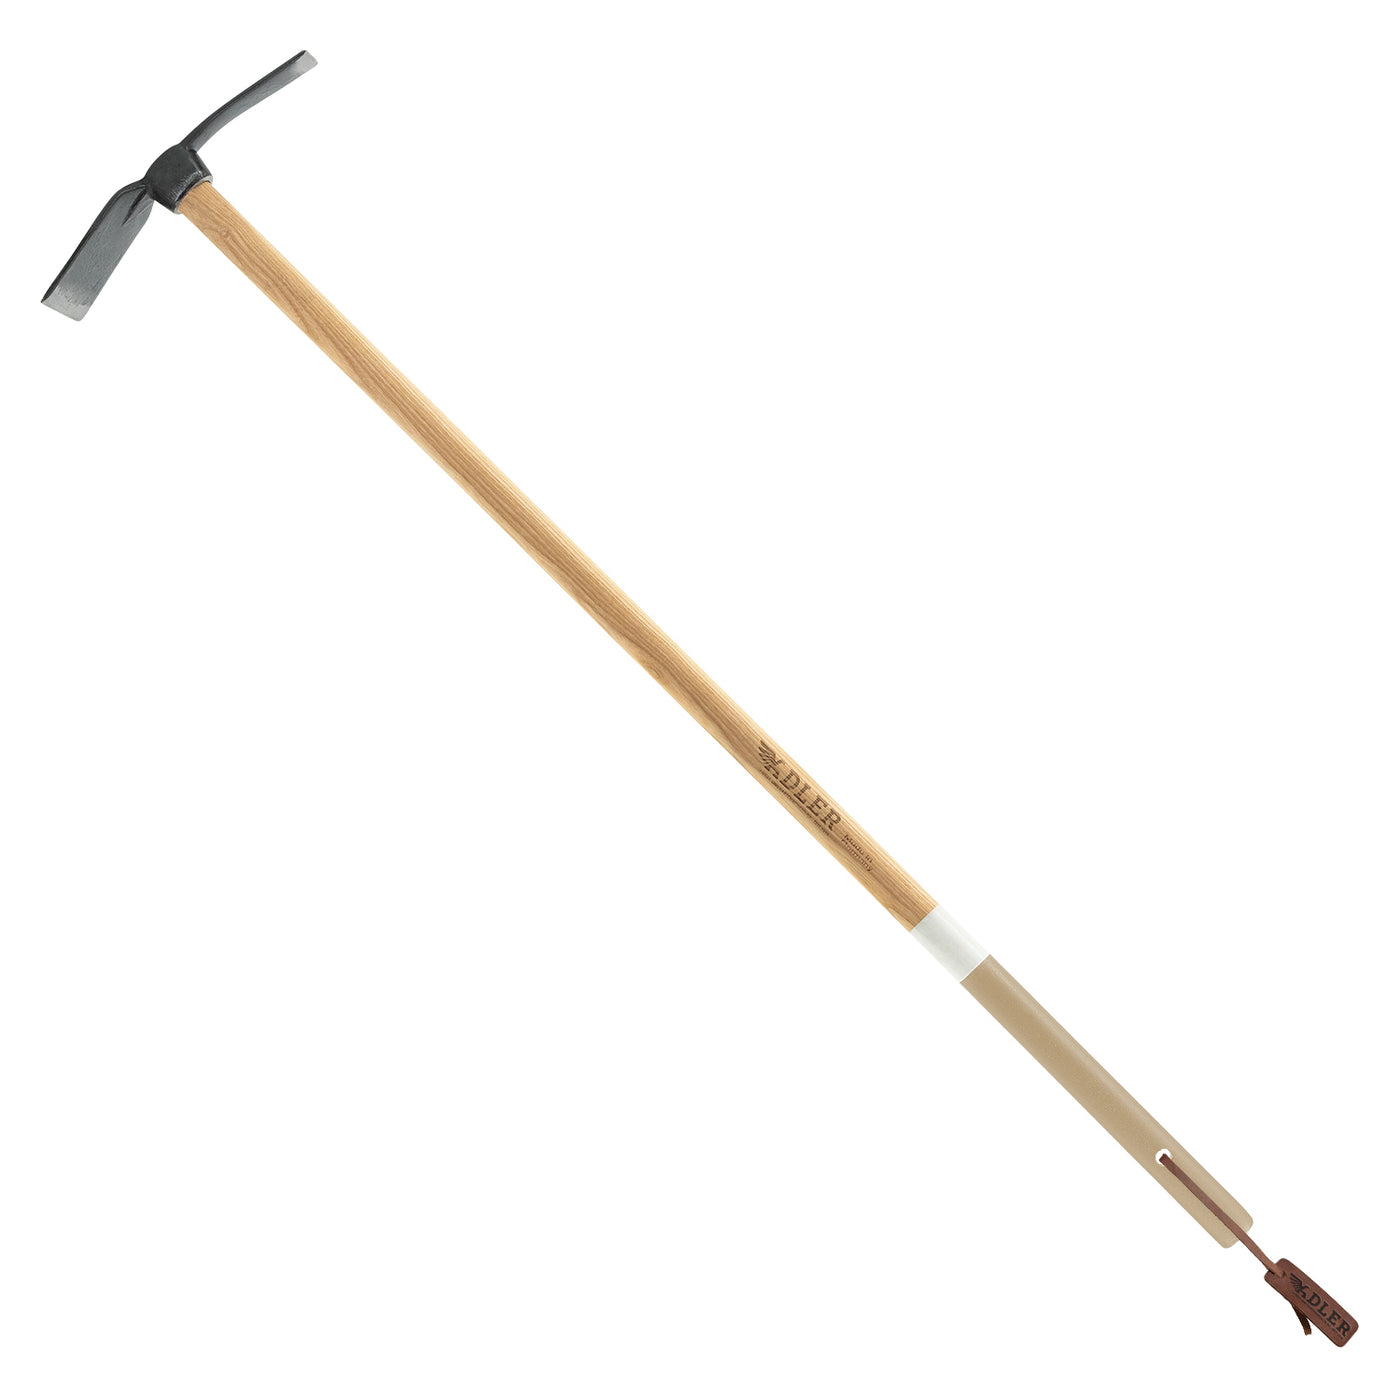 Garden Hoe “Rosie” with one prong